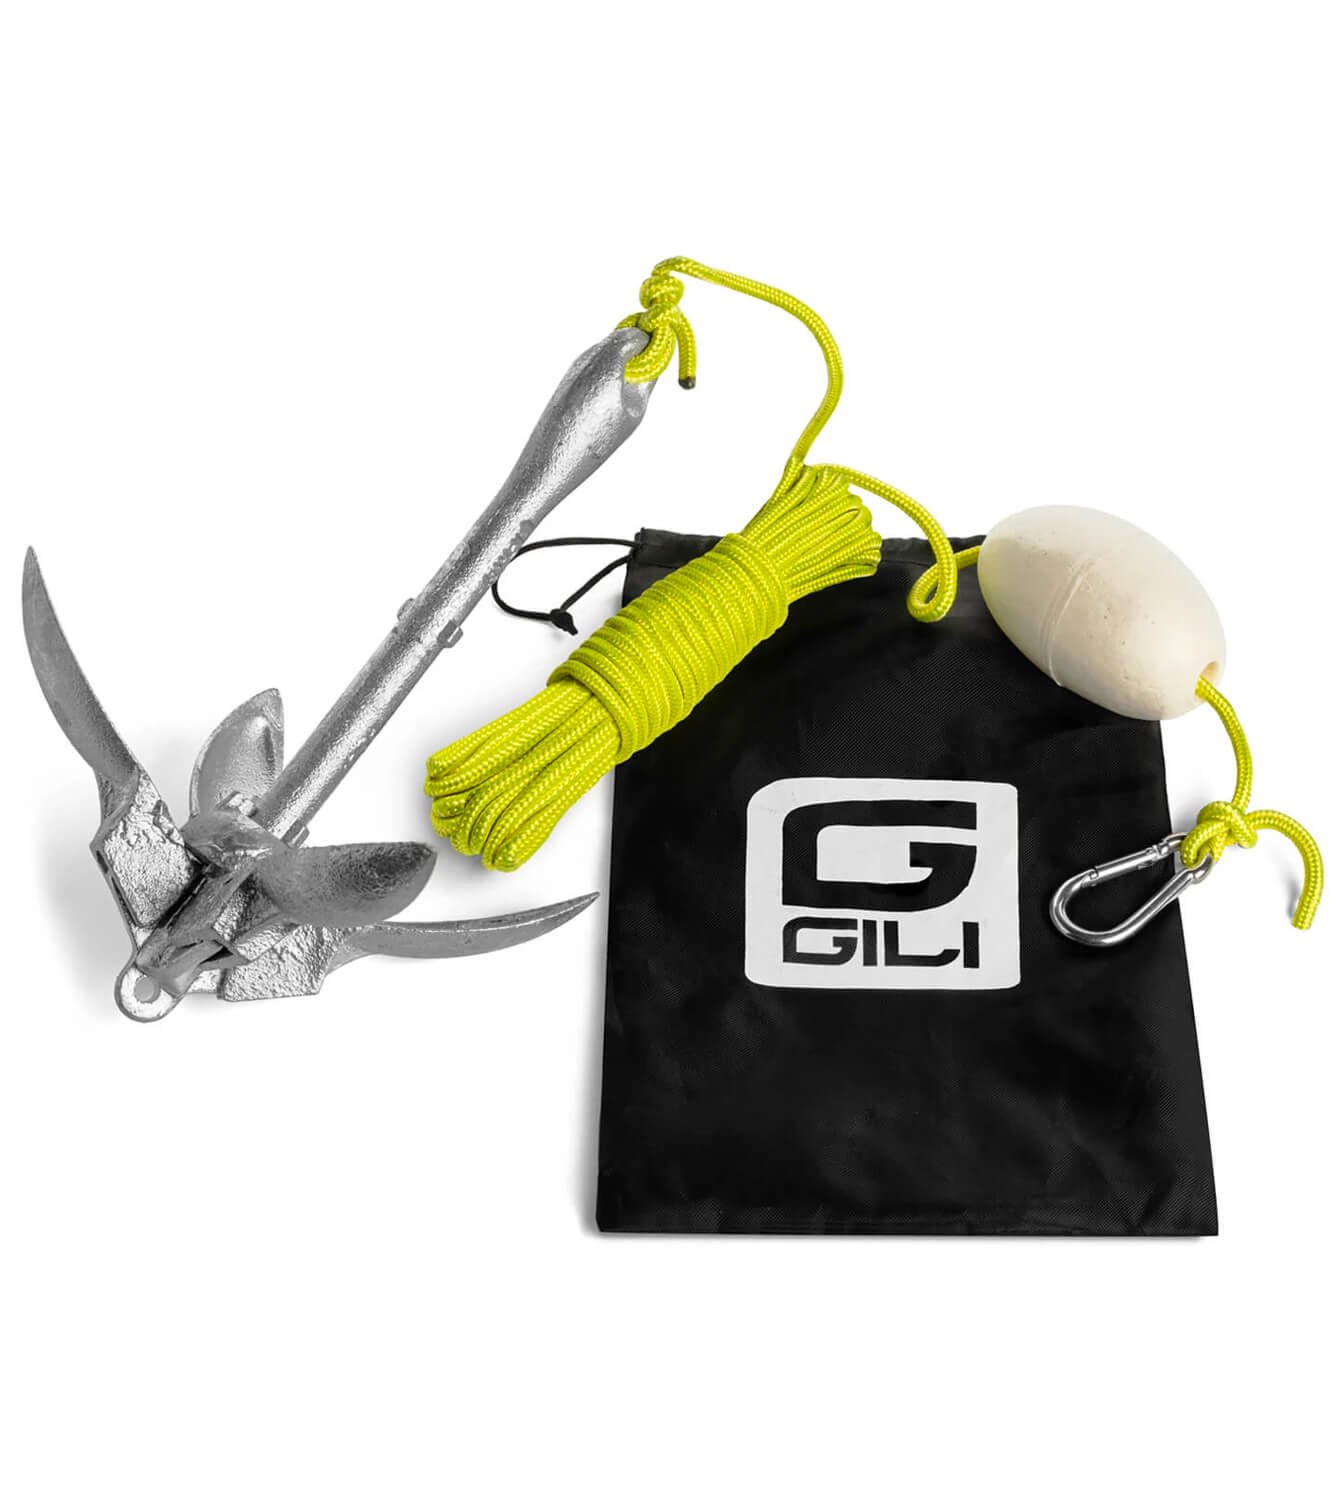 Best Paddle Board Anchor Gili Grapnel Anchor